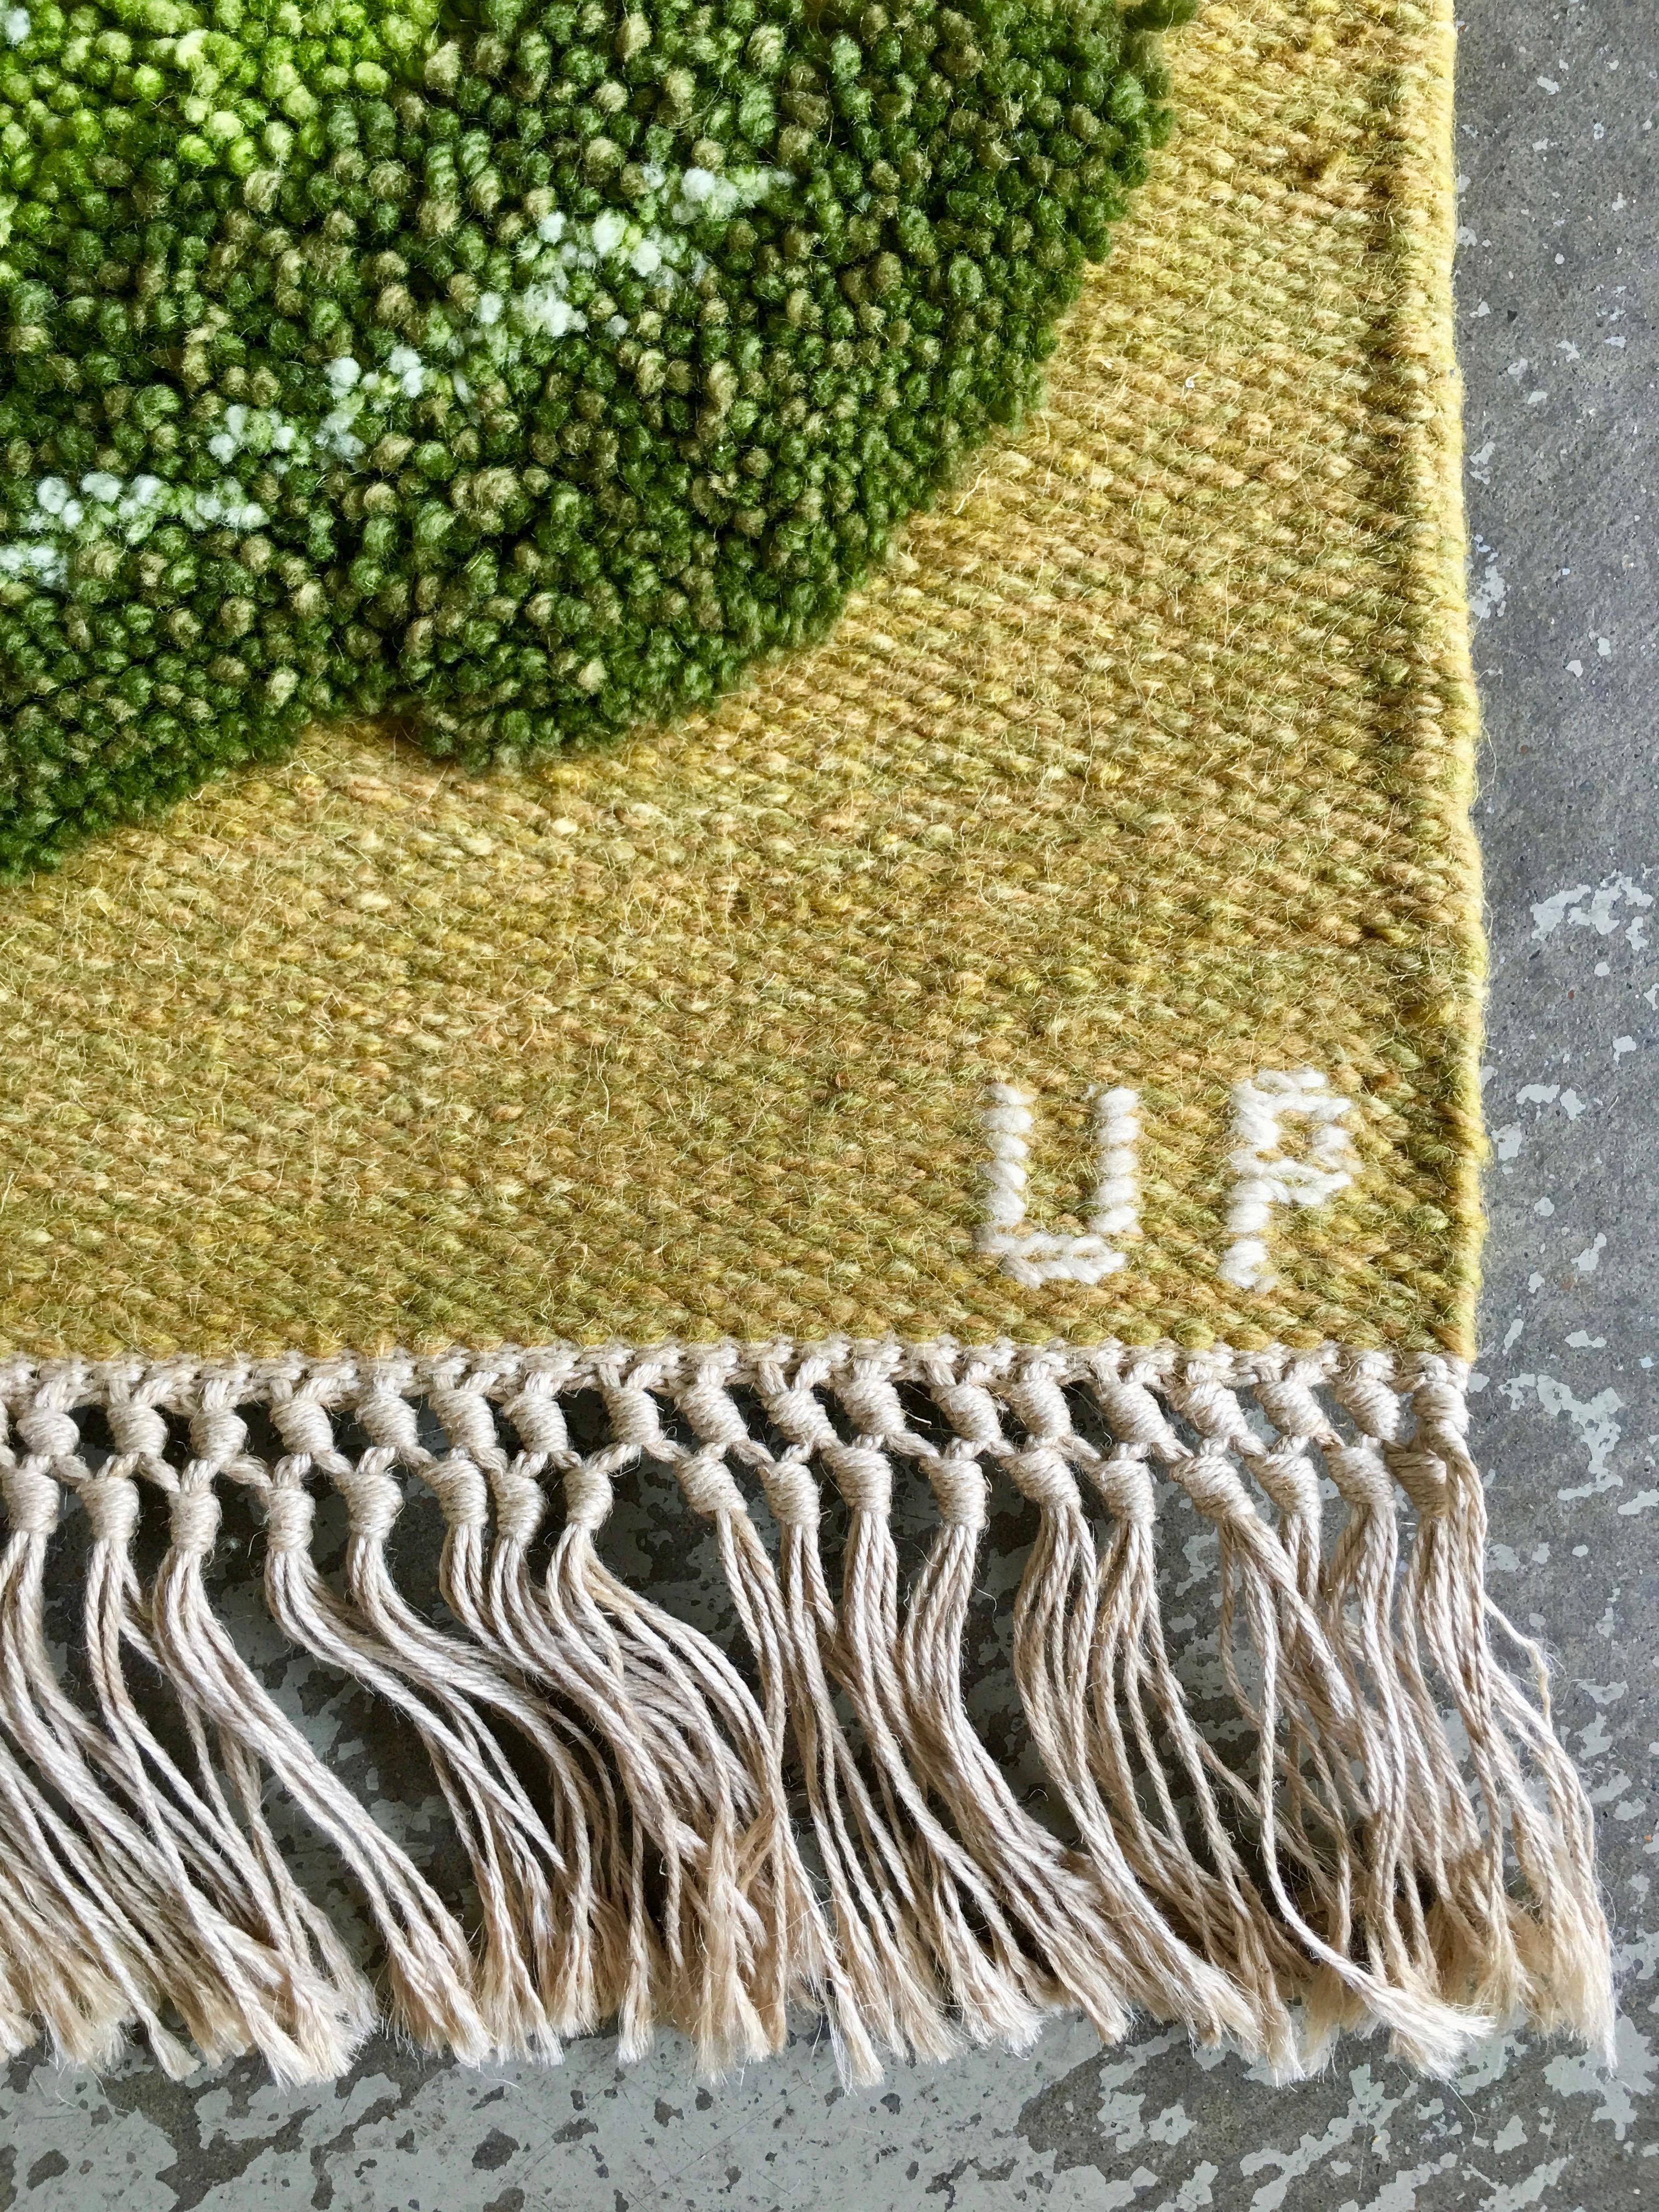 Classic composition of wildflower Dandelions and foliage. Composed on a flat-weave base with tufted detail. Complete with hanging bar in vintage condition with minor wear.